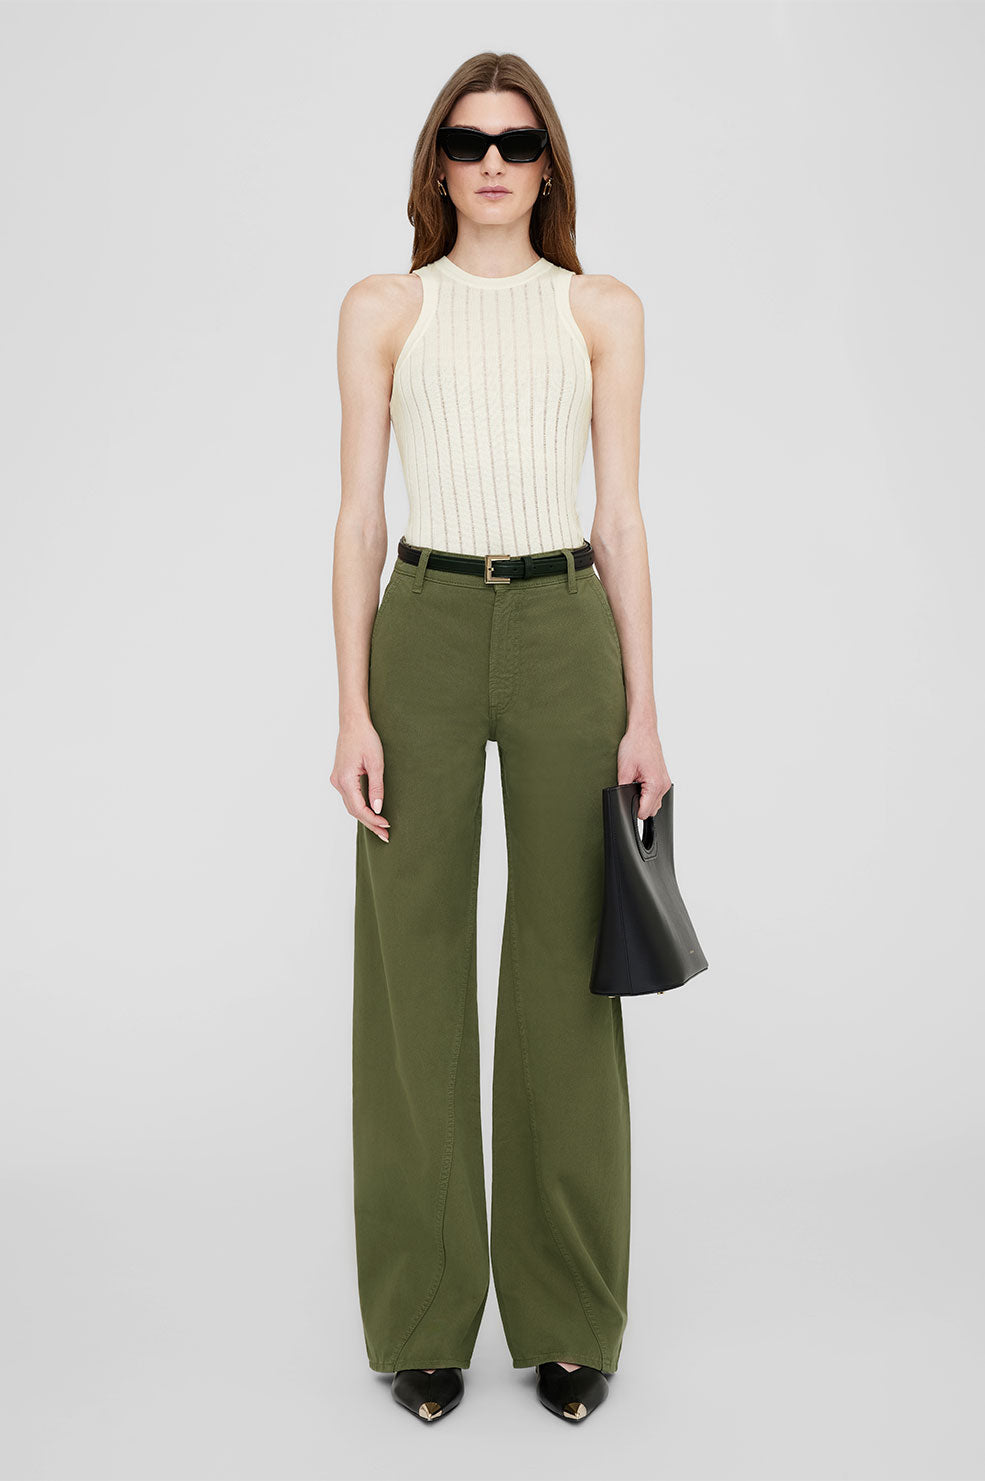 ANINE BING Briley Pant - Army Green - On Model Front